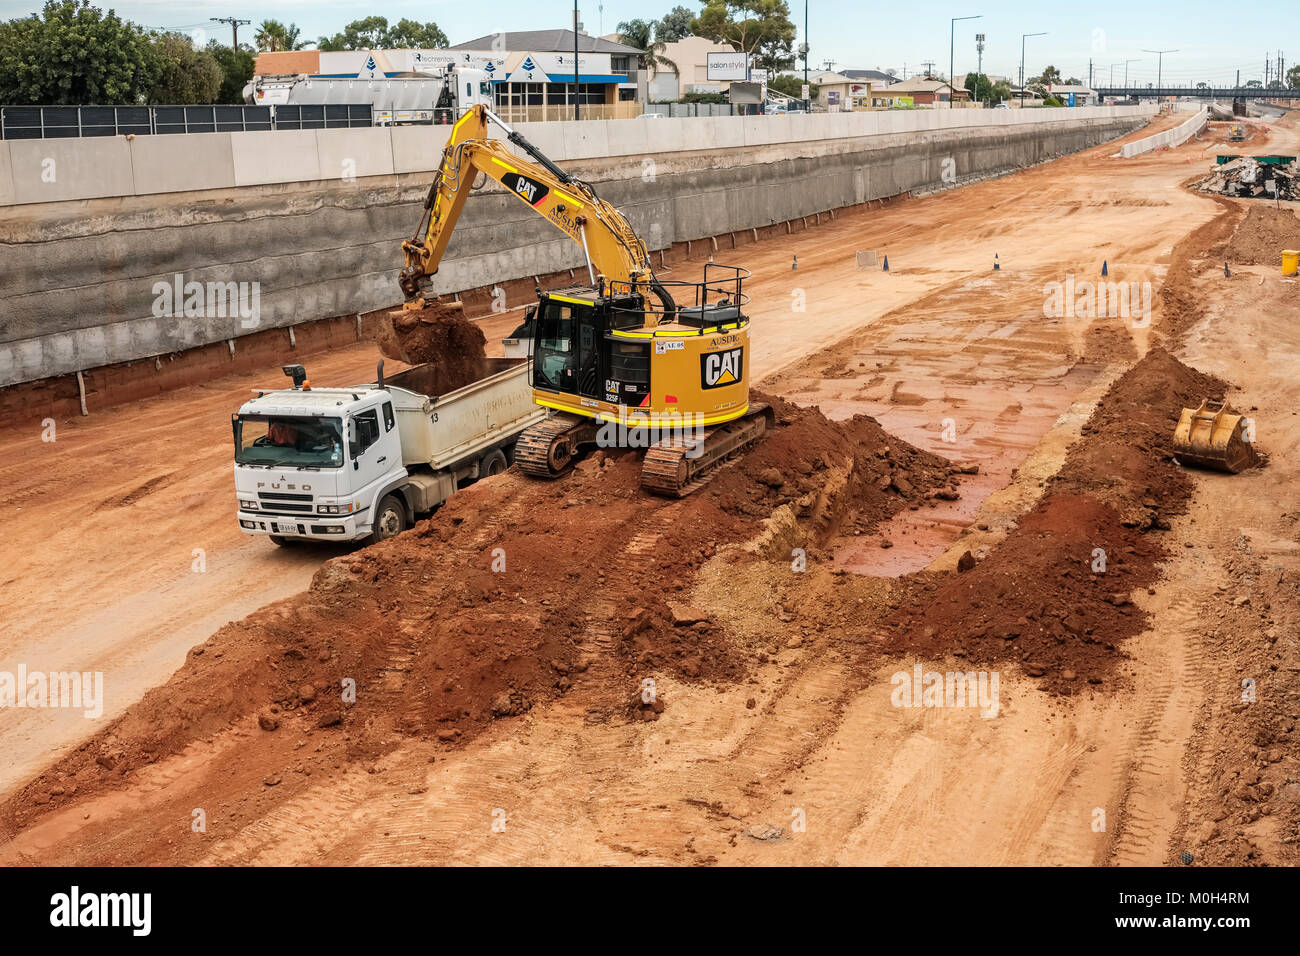 Adelaide, Australia - January 10, 2018: Torrens Road to River Torrens Project under construction view along South Rd on a day. New six-lane 4km roadwa Stock Photo